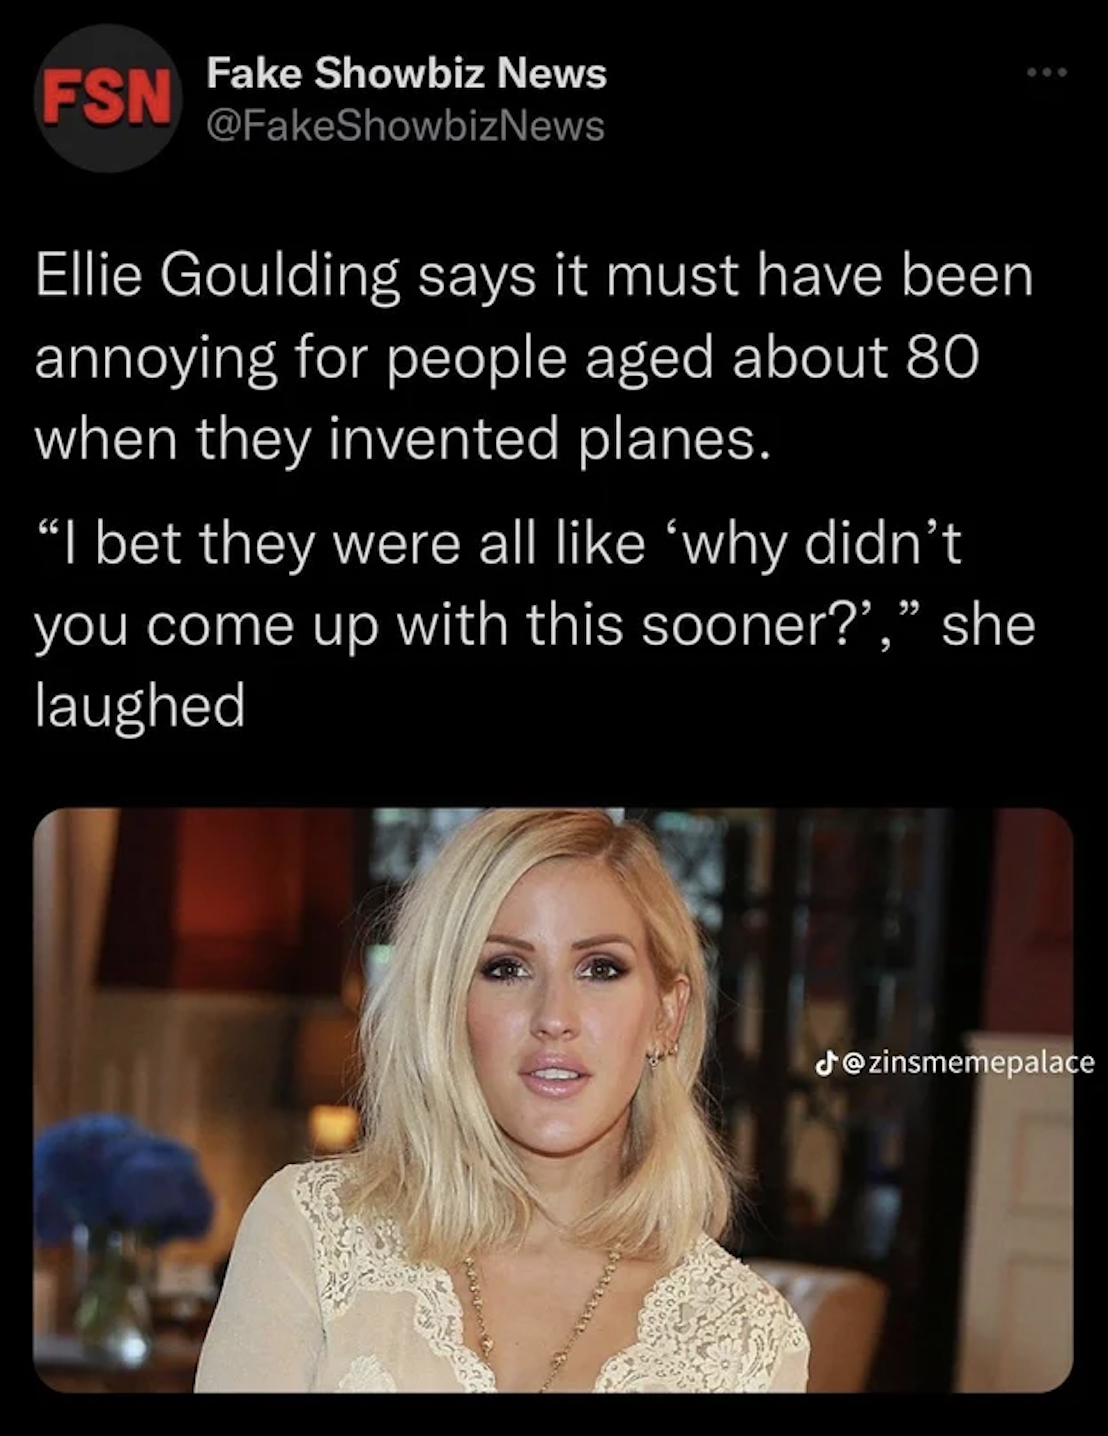 Ellie Goulding says - photo caption - Fsn Fake Showbiz News Ellie Goulding says it must have been annoying for people aged about 80 when they invented planes.